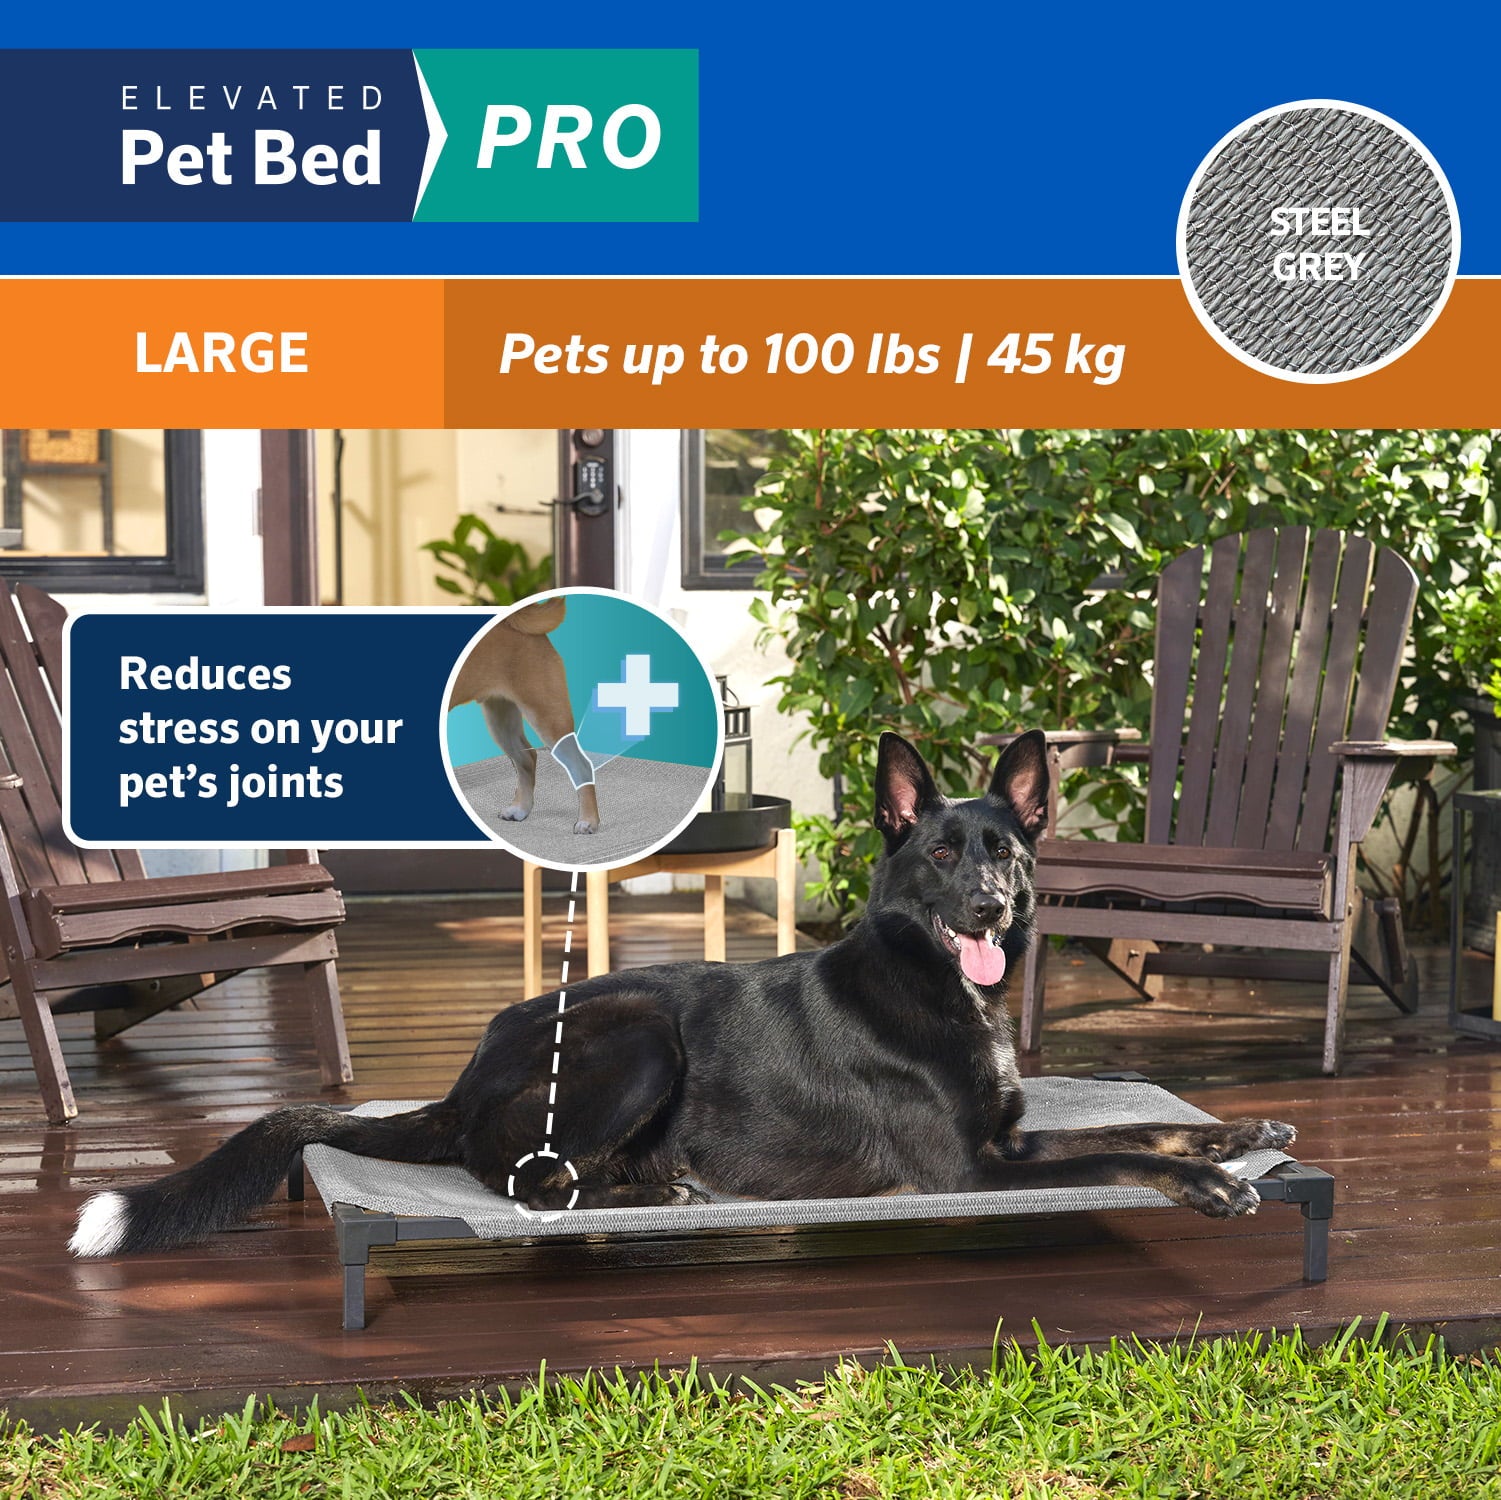 Coolaroo Cooling Elevated Pet Bed Pro， Large， Fits in 48in Crates， Steel